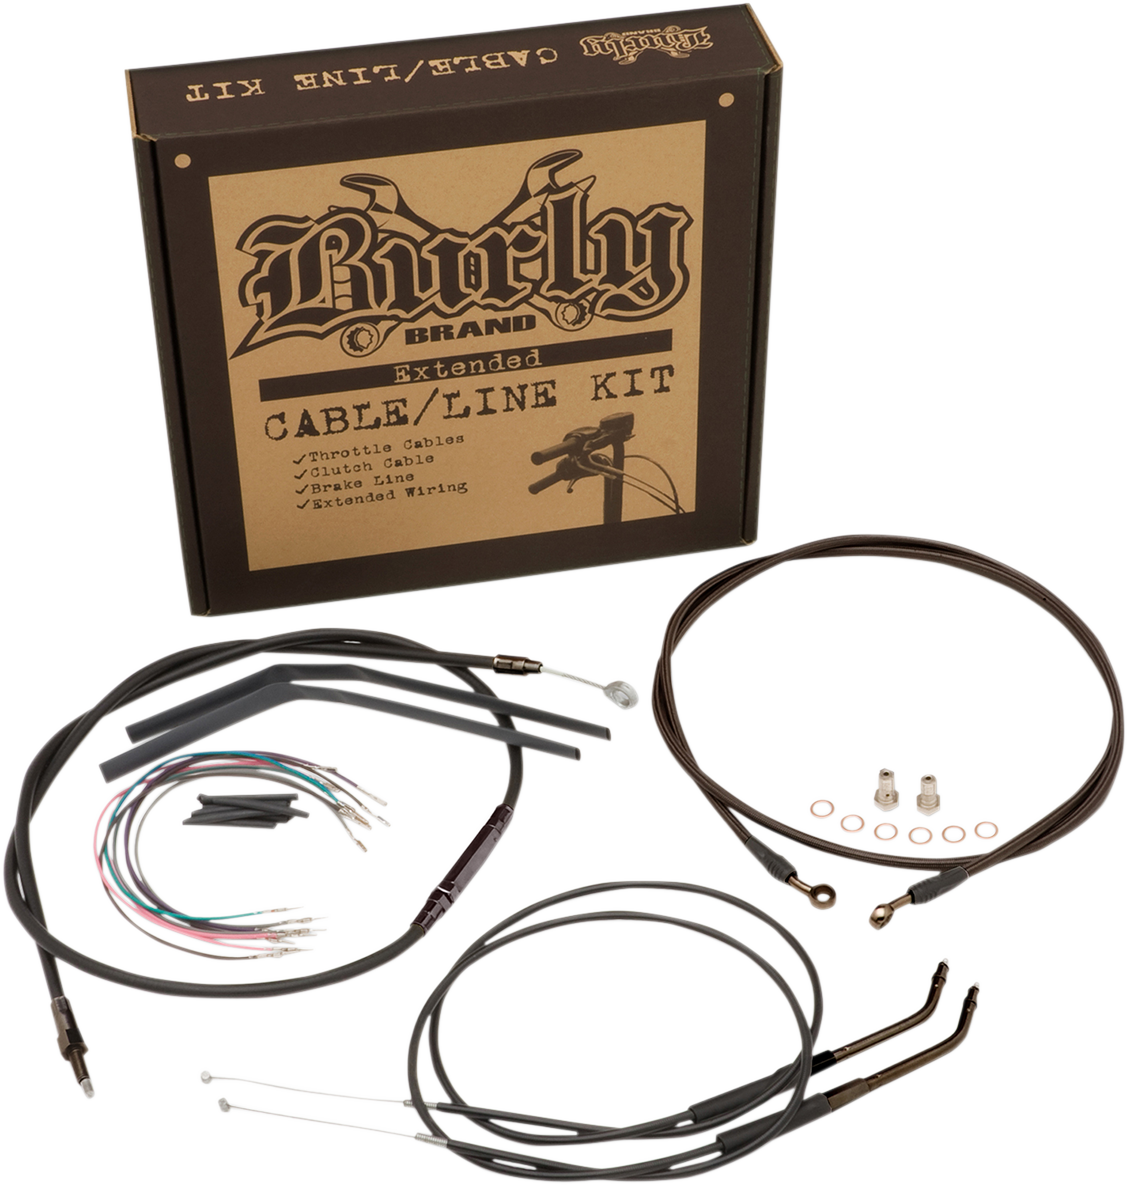 Burly Jail Bar 14" Non ABS Handlebar Cable Kit 2012-2017 Harley Dyna FXDB FXDCI